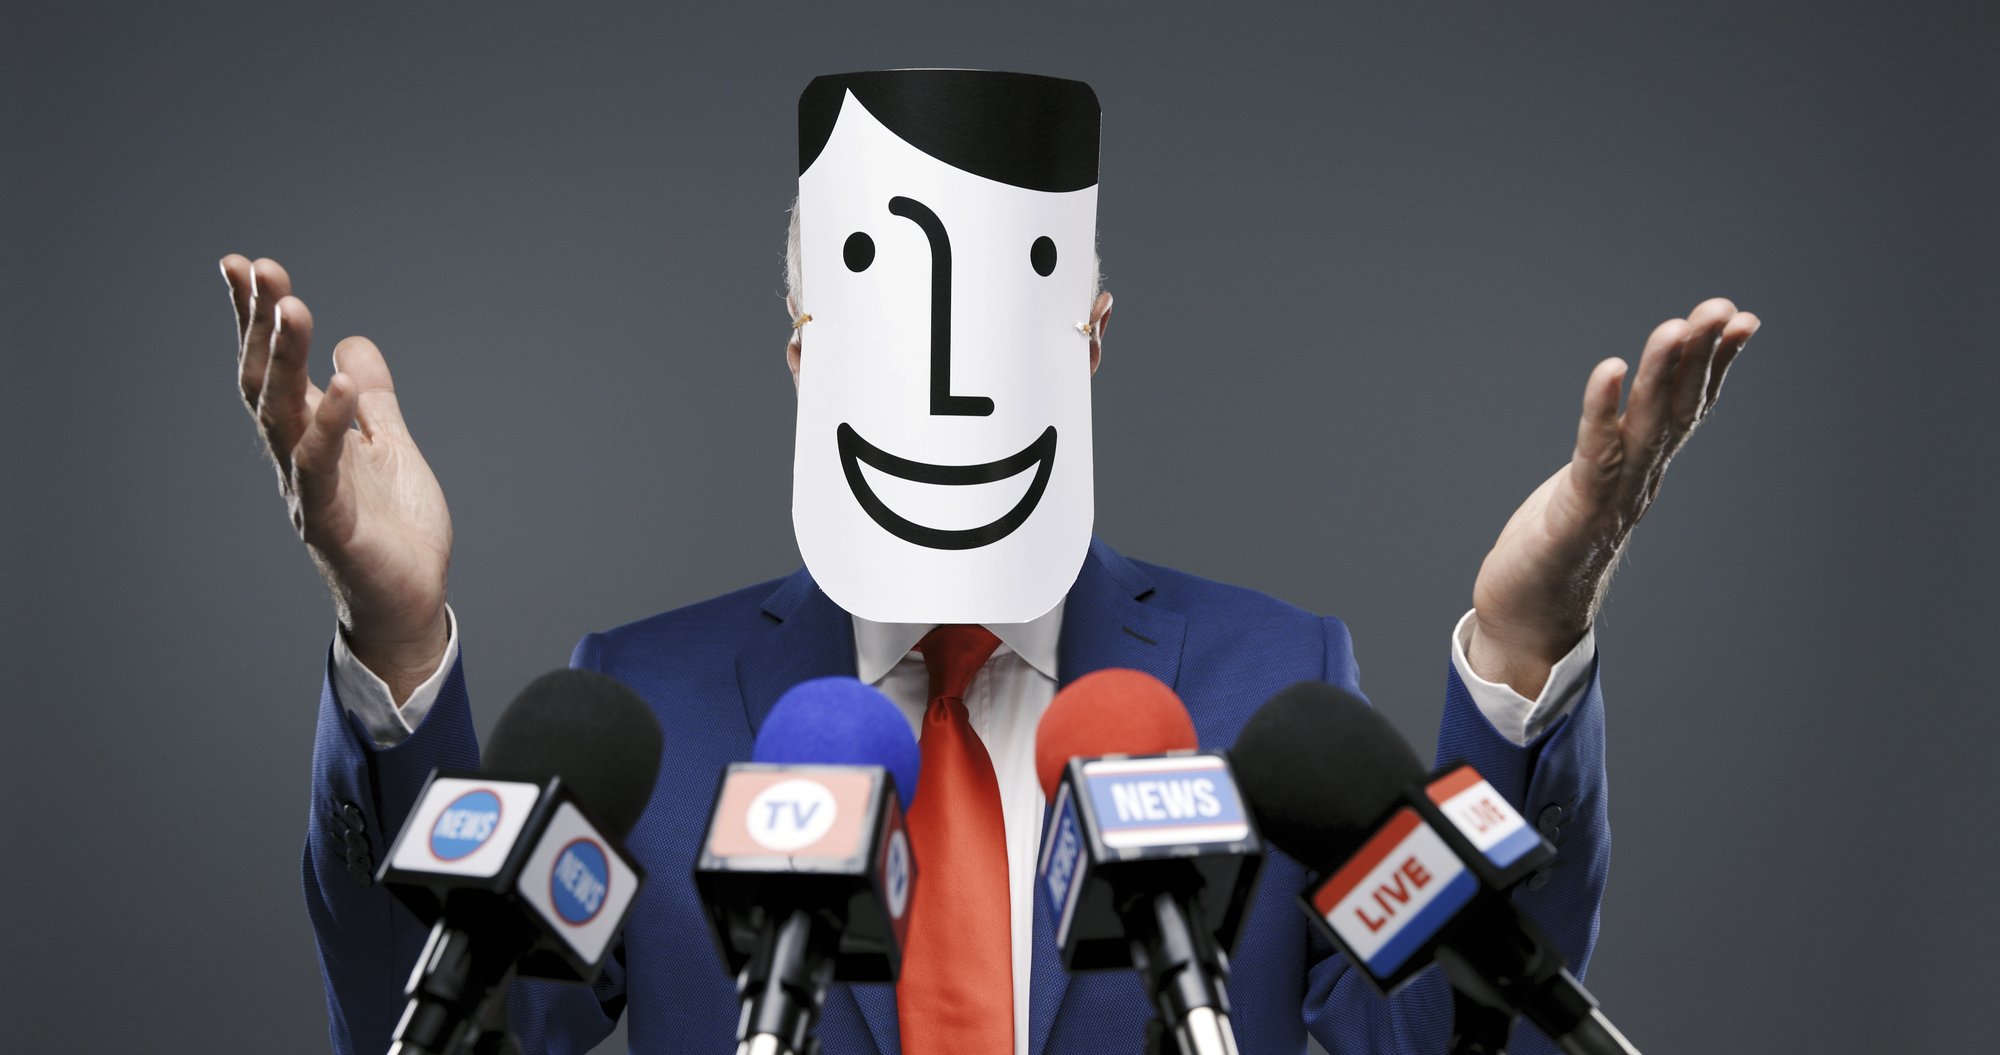 image of politician wearing mask